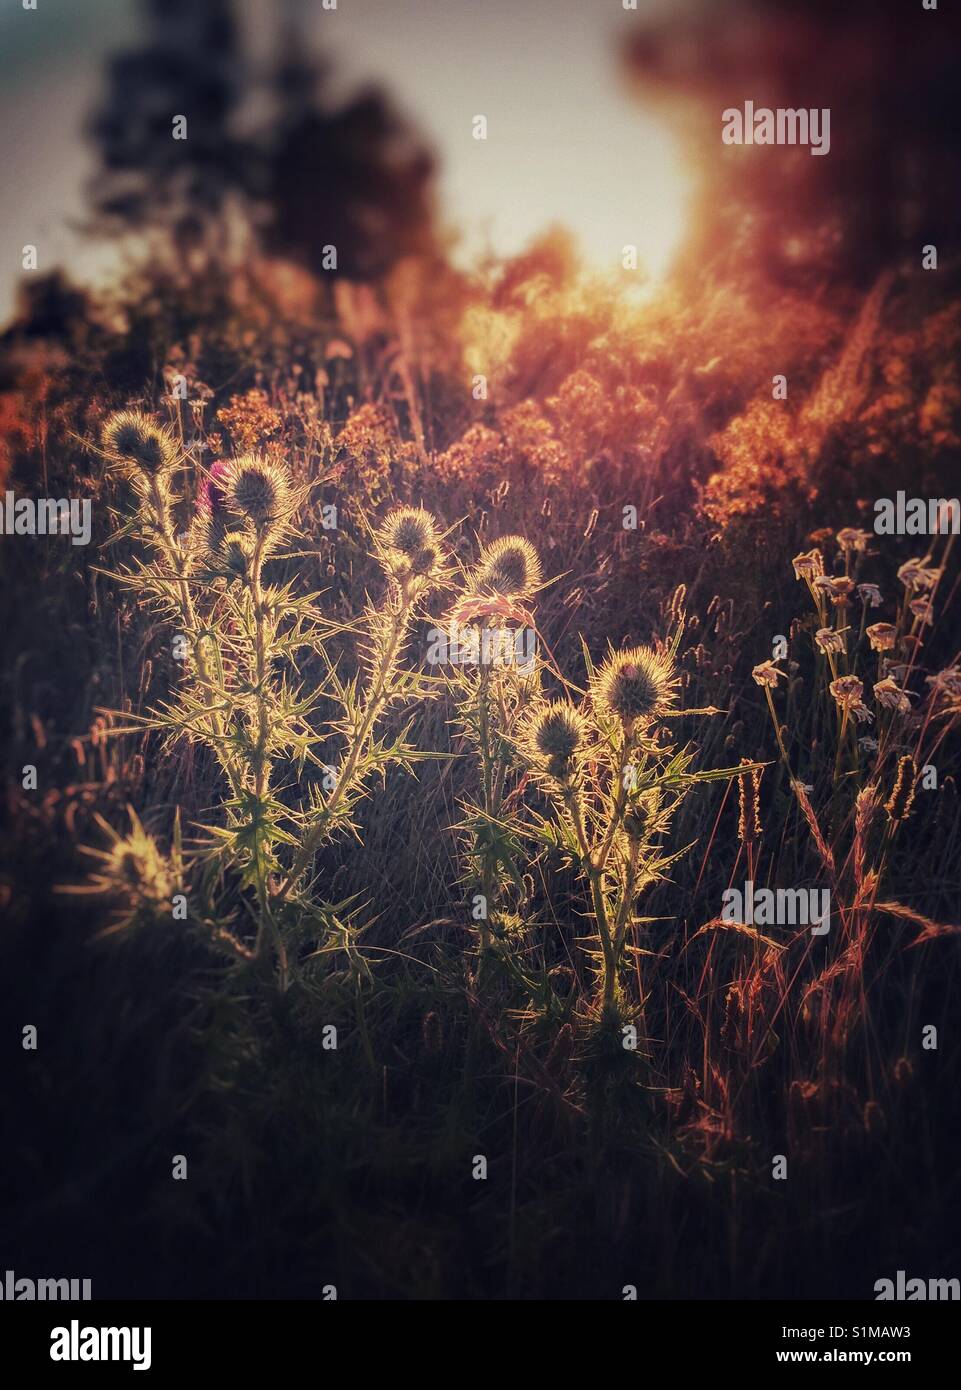 Wild thistle plants backlit by a setting sun, British Columbia, Canada. Stock Photo